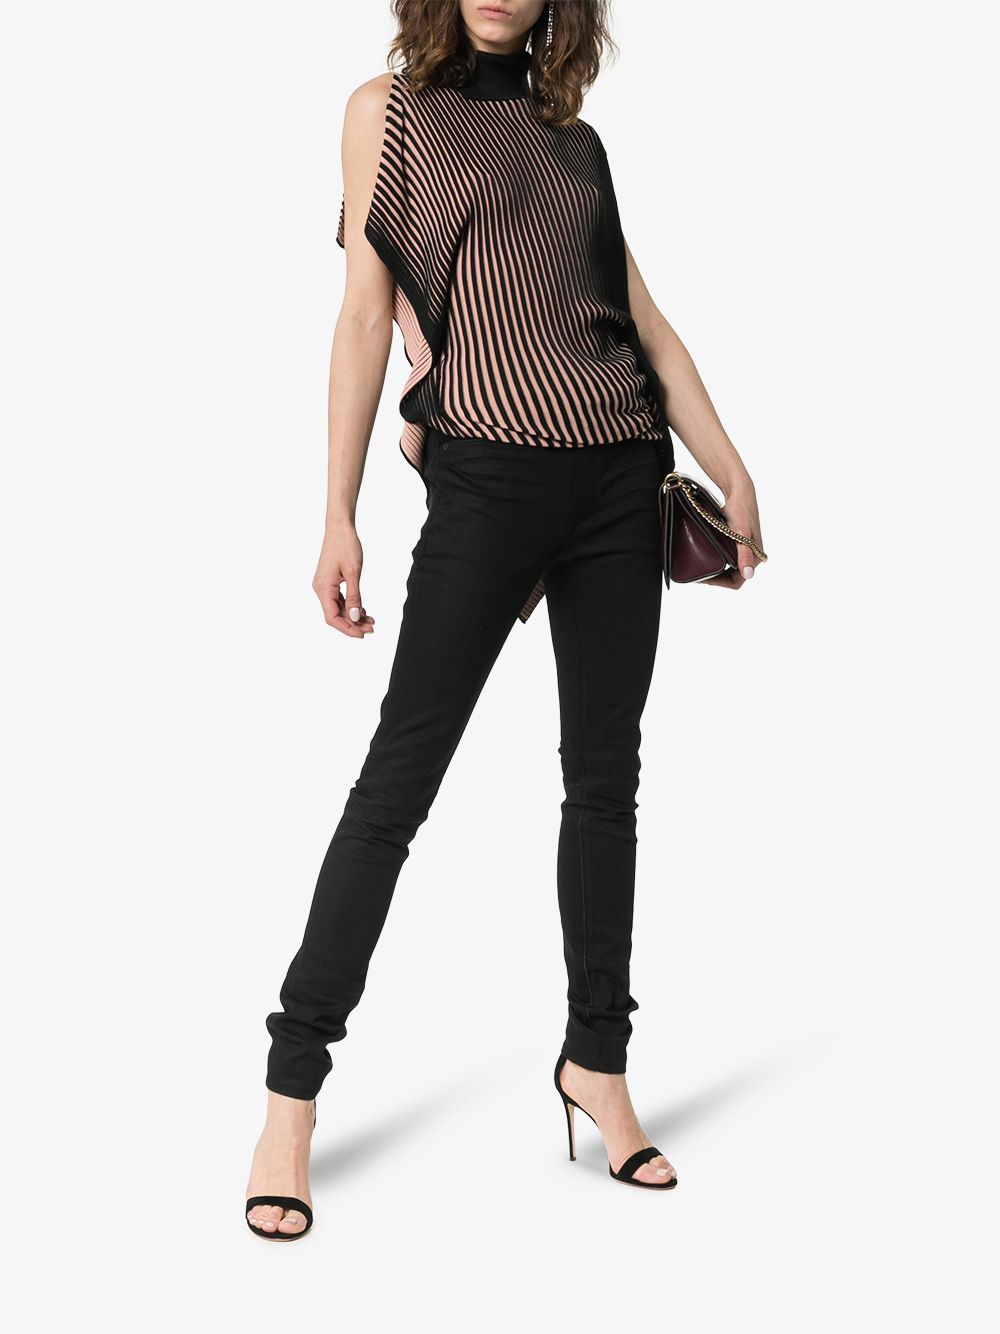 Black stretch cotton mid-rise skinny jeans